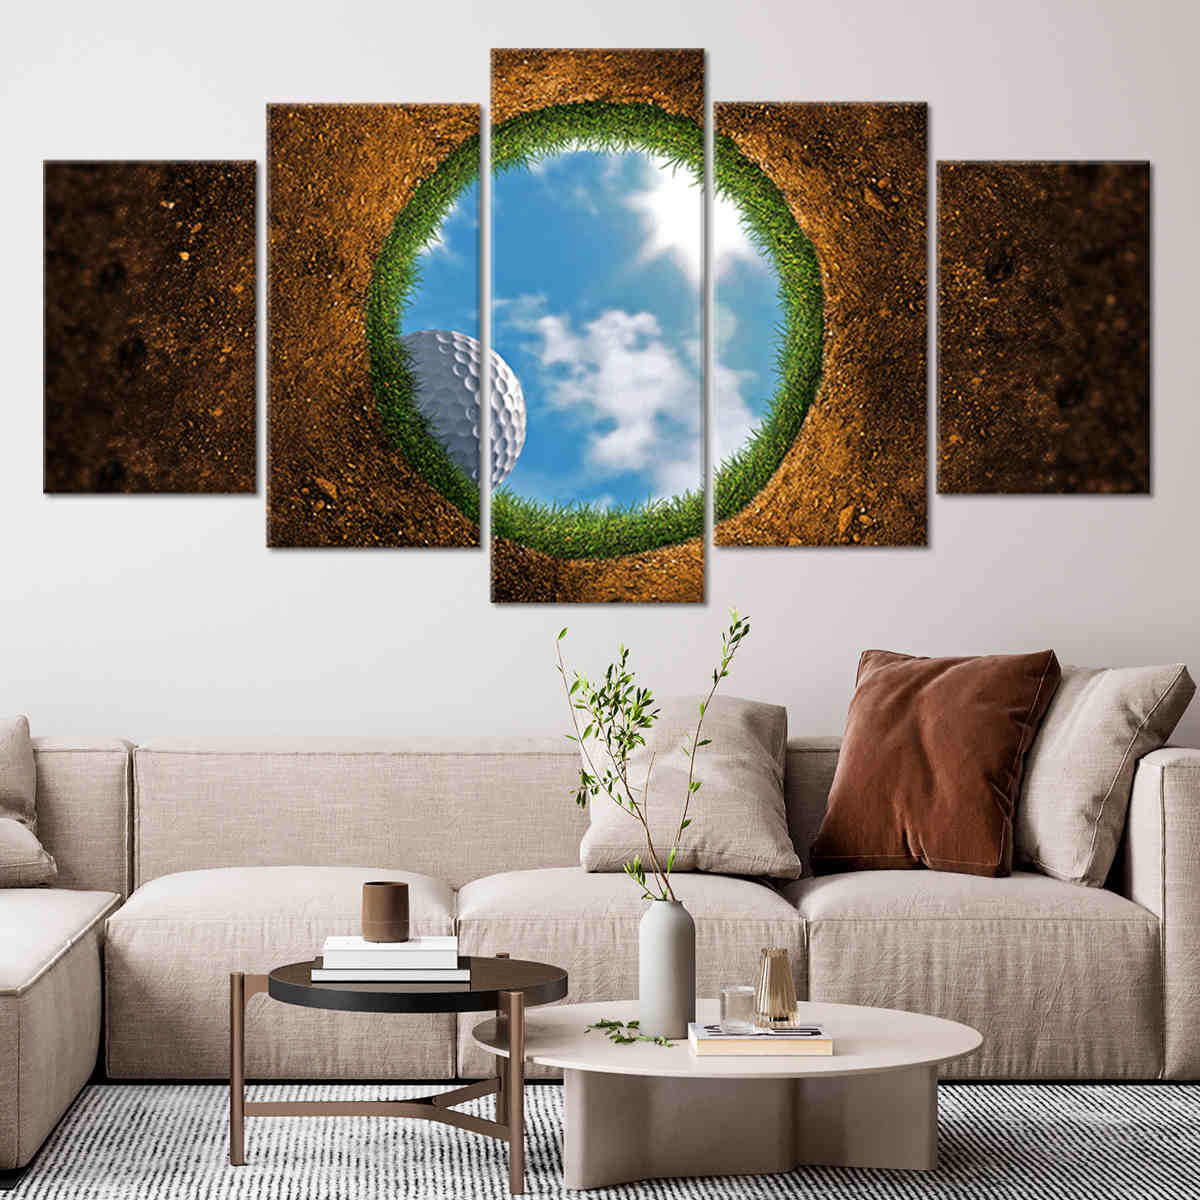 Golf Ball by The Hole Wall Art